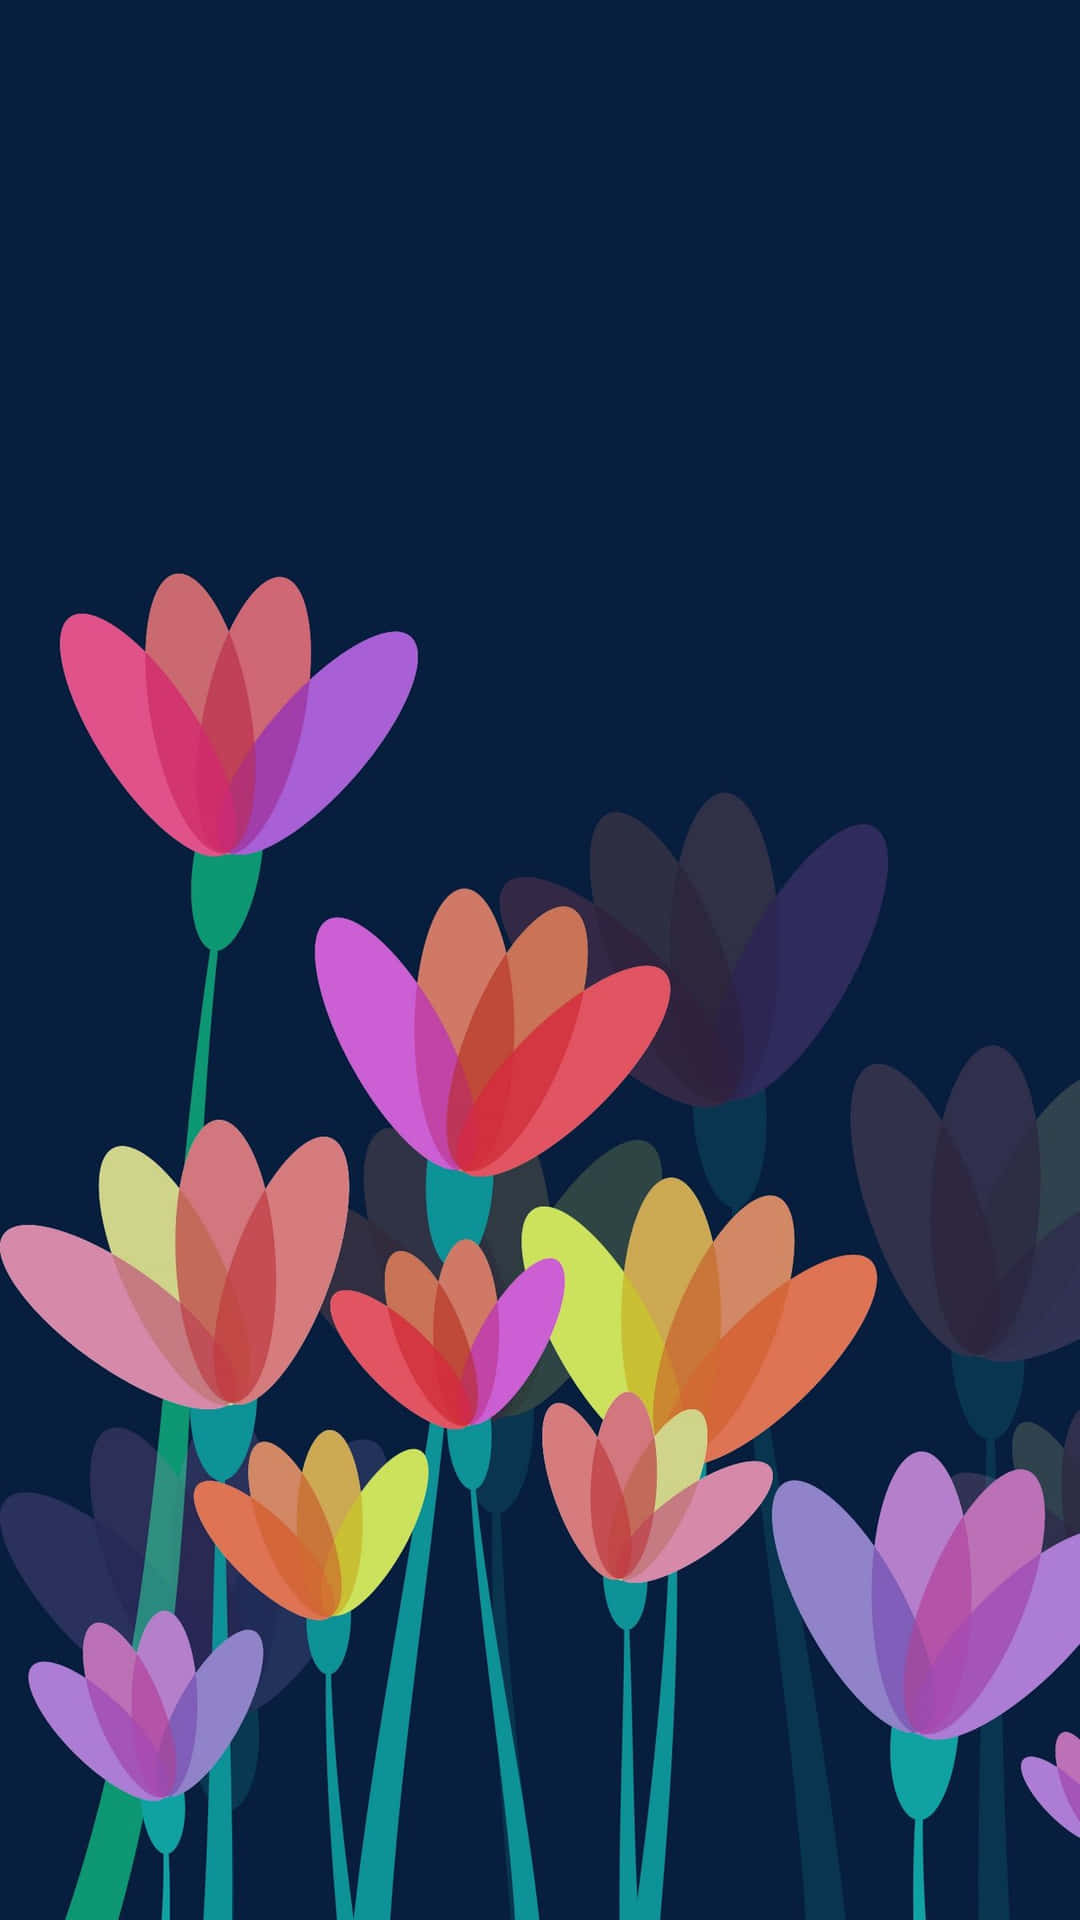 "Bring some vibrant color to your life with this beautiful Colorful Flowers Iphone wallpaper!" Wallpaper